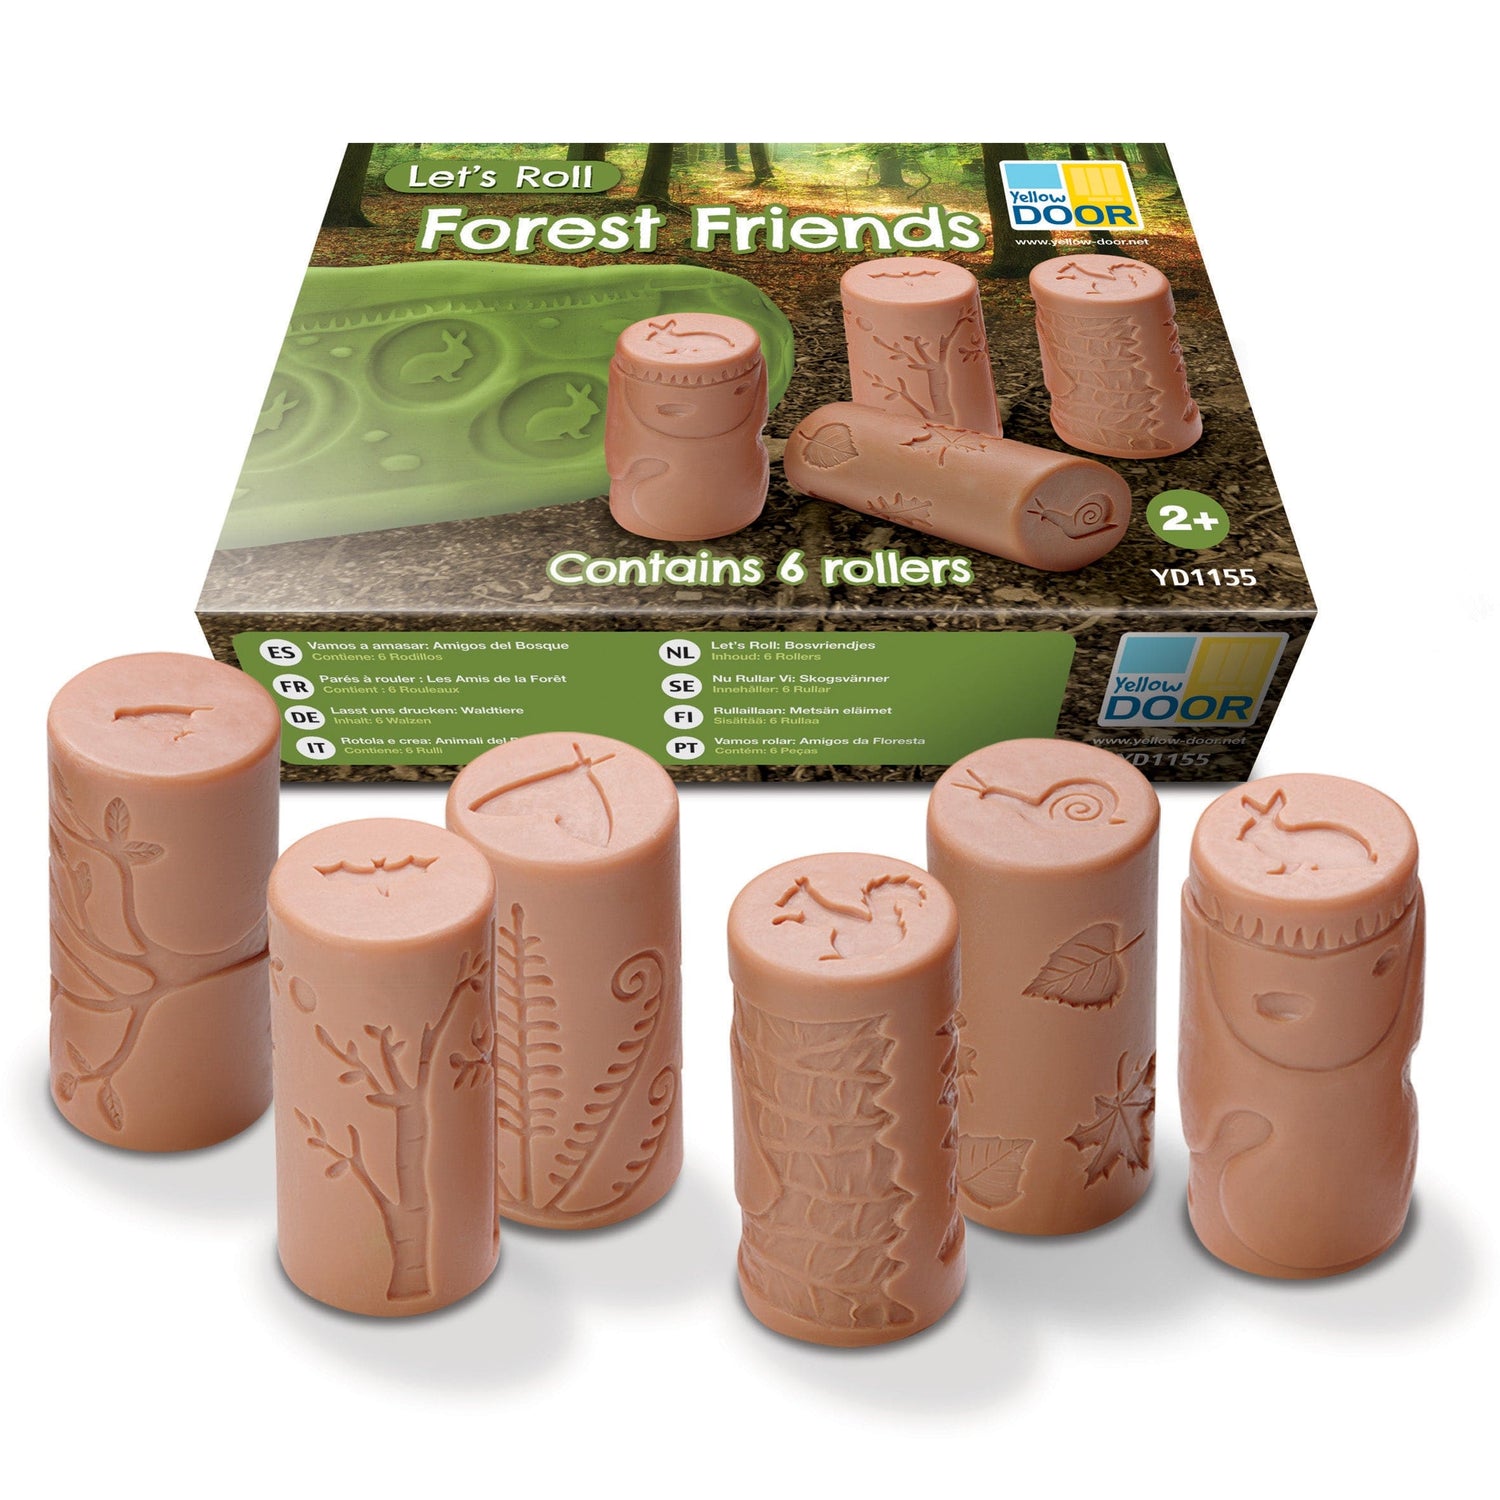 Yellow Door Sensory Play Play Dough Roller & Stamper - Forest Friends (6 pack)